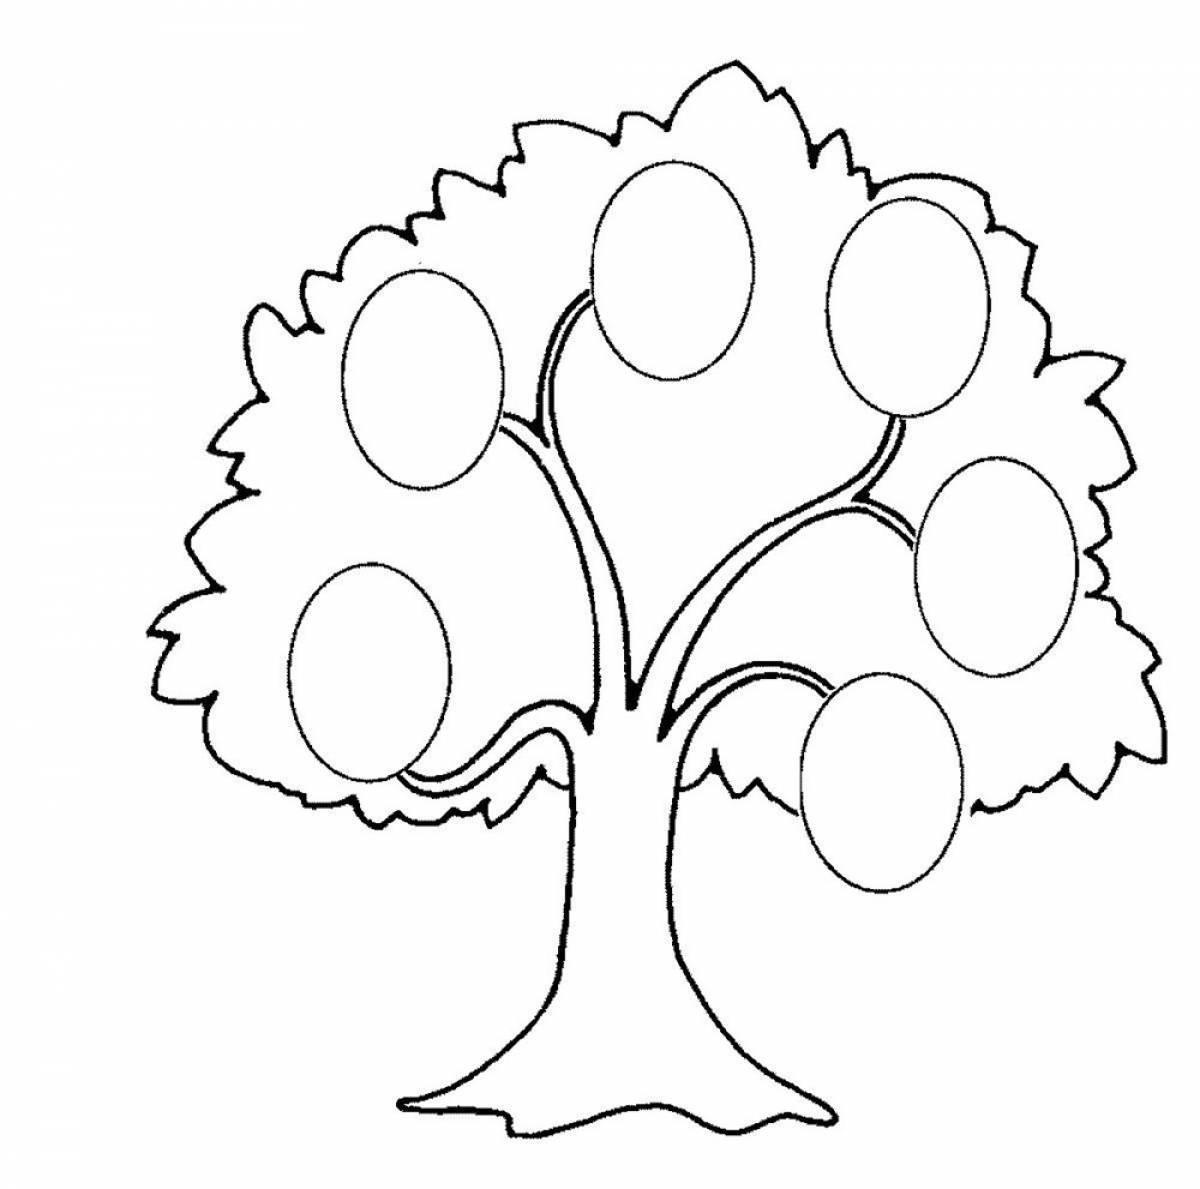 Incredible tree coloring book for 6-7 year olds